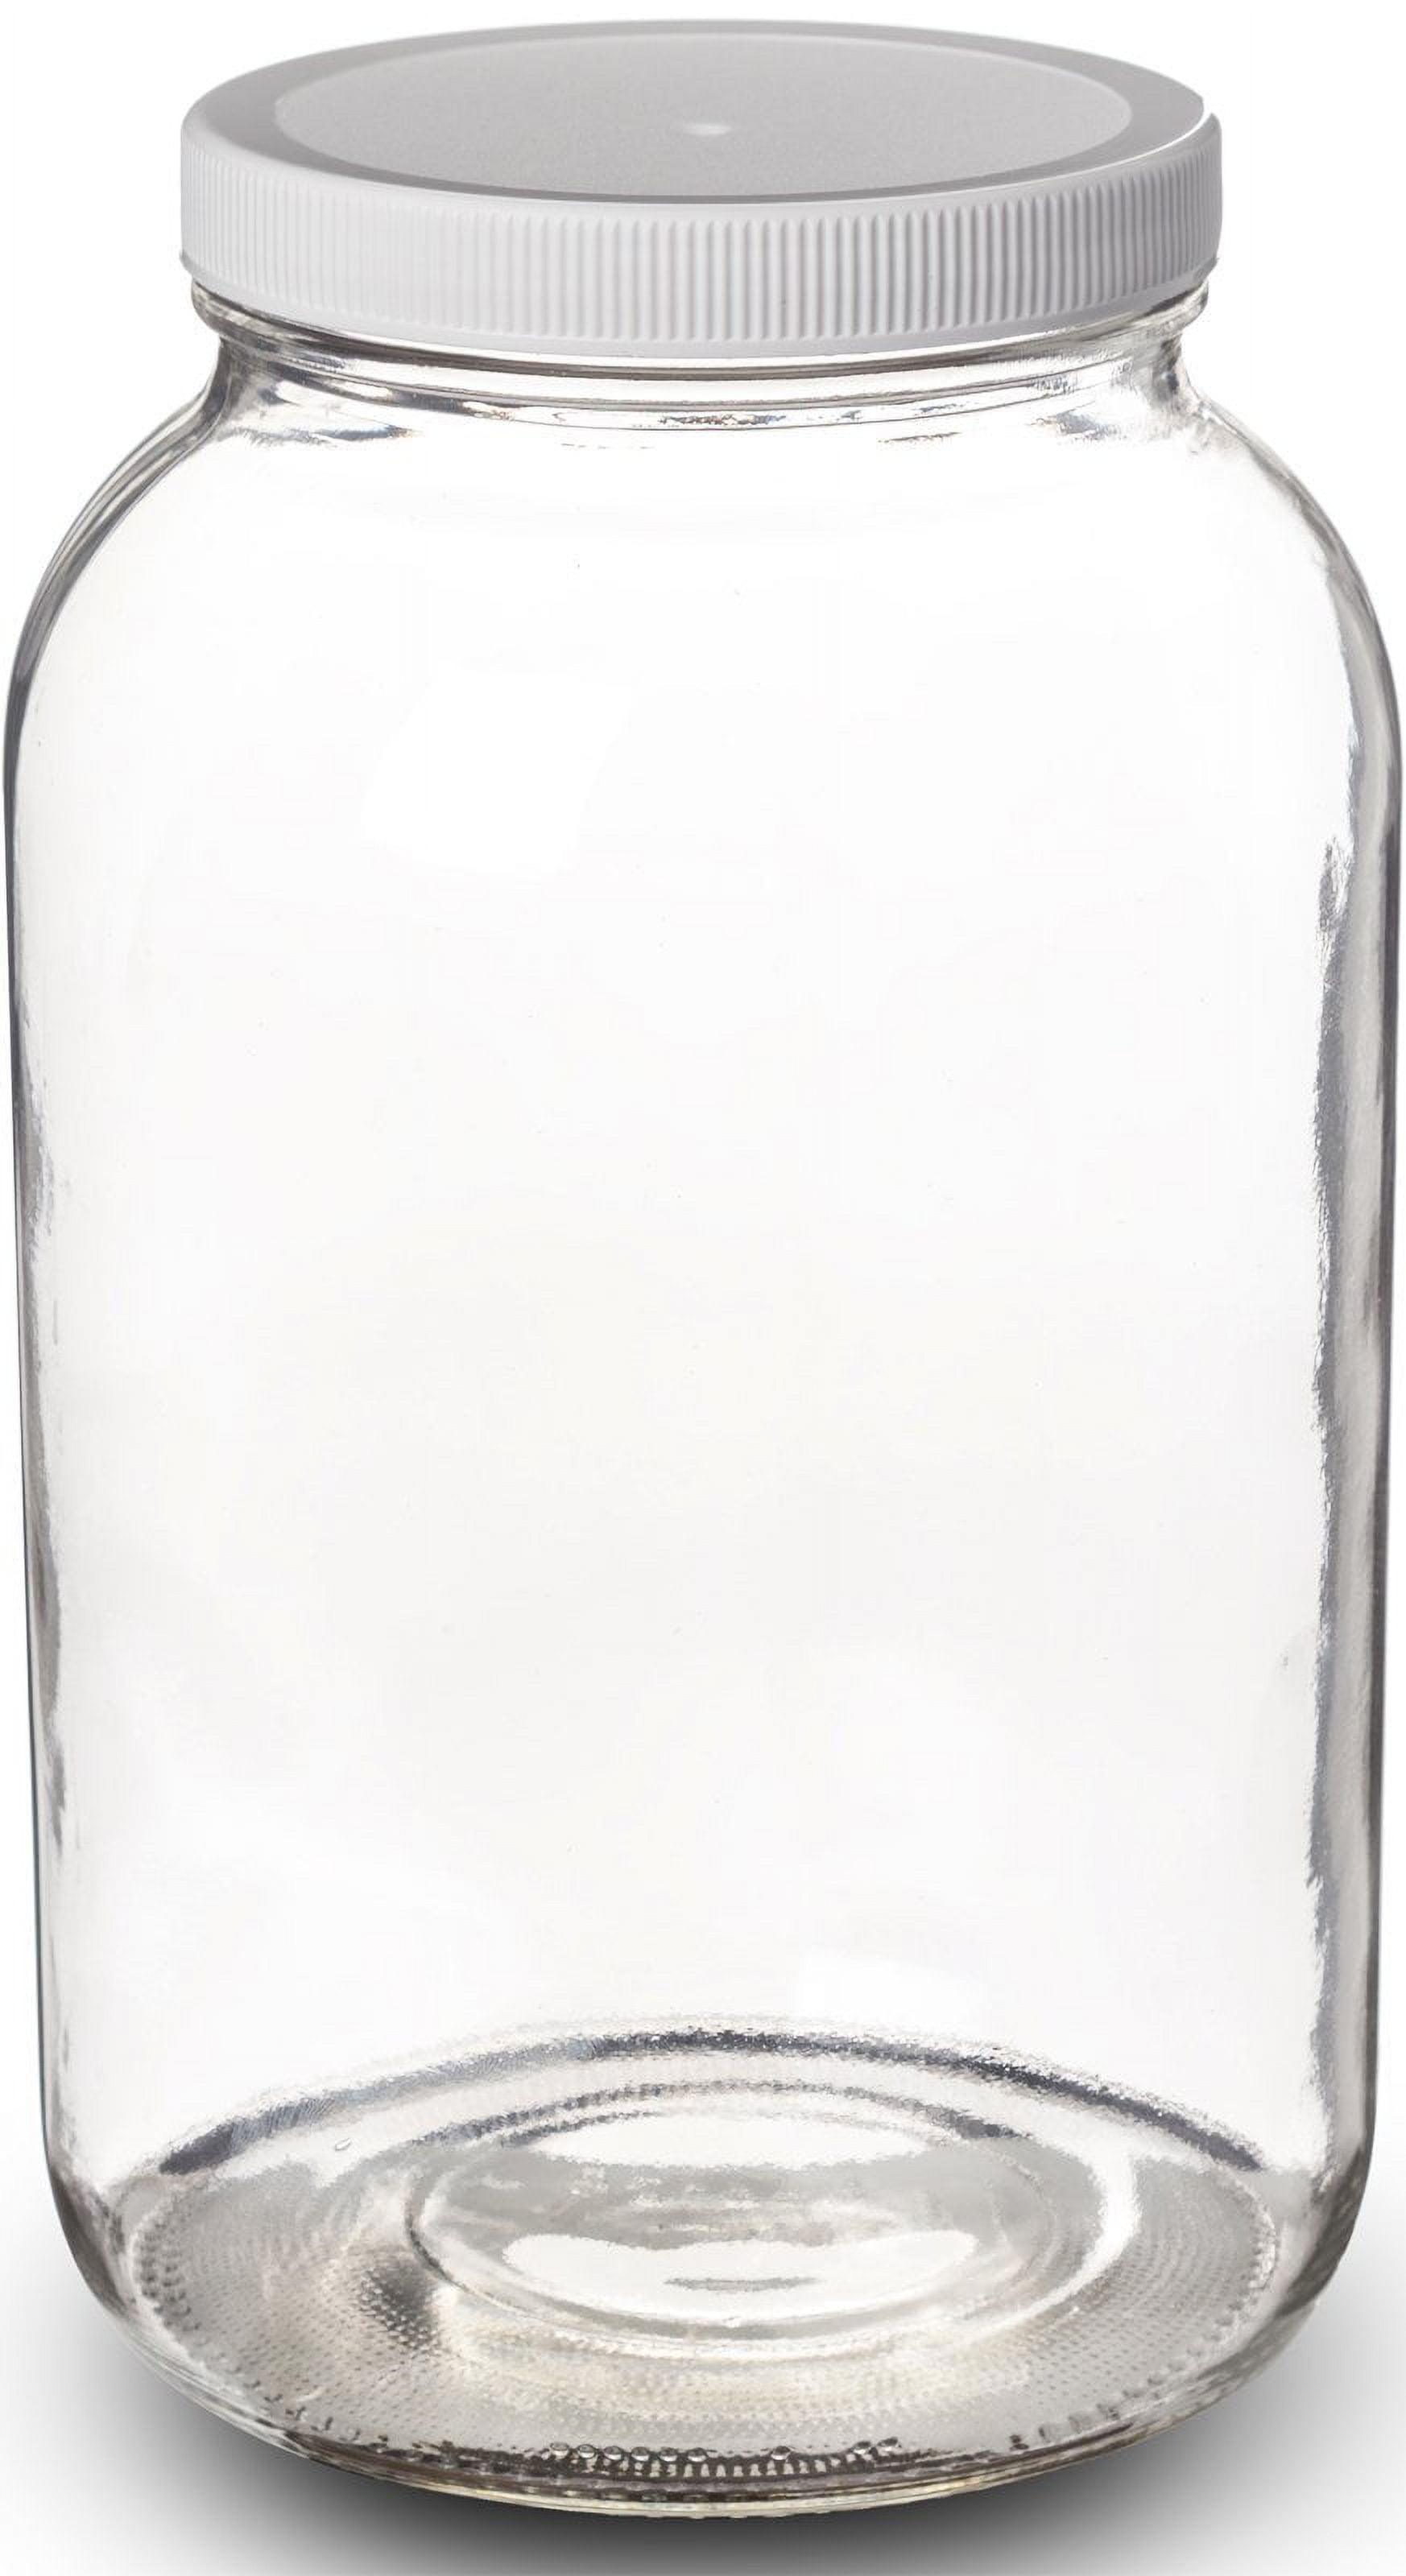 ljdeals 1 Gallon Clear Plastic Storage Containers Grip Jars, Wide Mouth  Square Canisters, Pack of 2, BPA Free, Food Safe, Made in USA